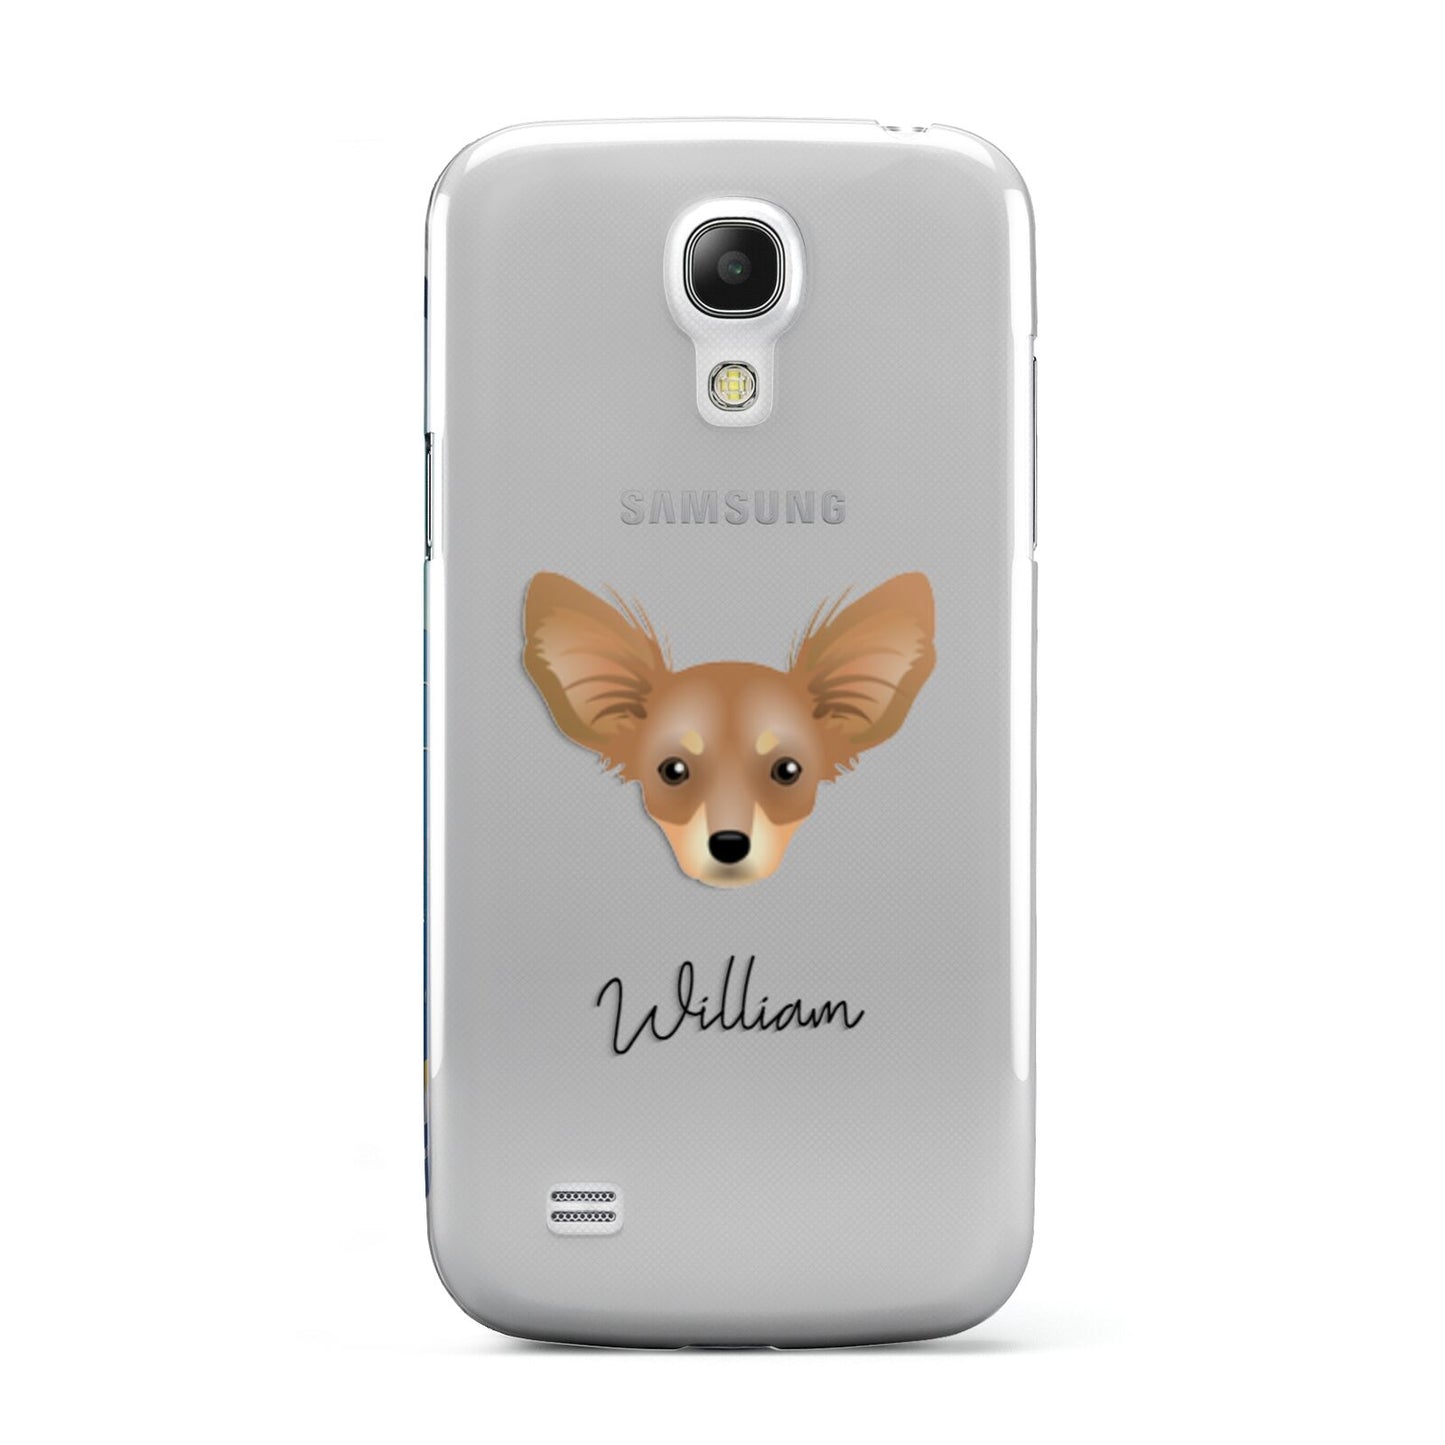 Russian Toy Personalised Samsung Galaxy S4 Mini Case